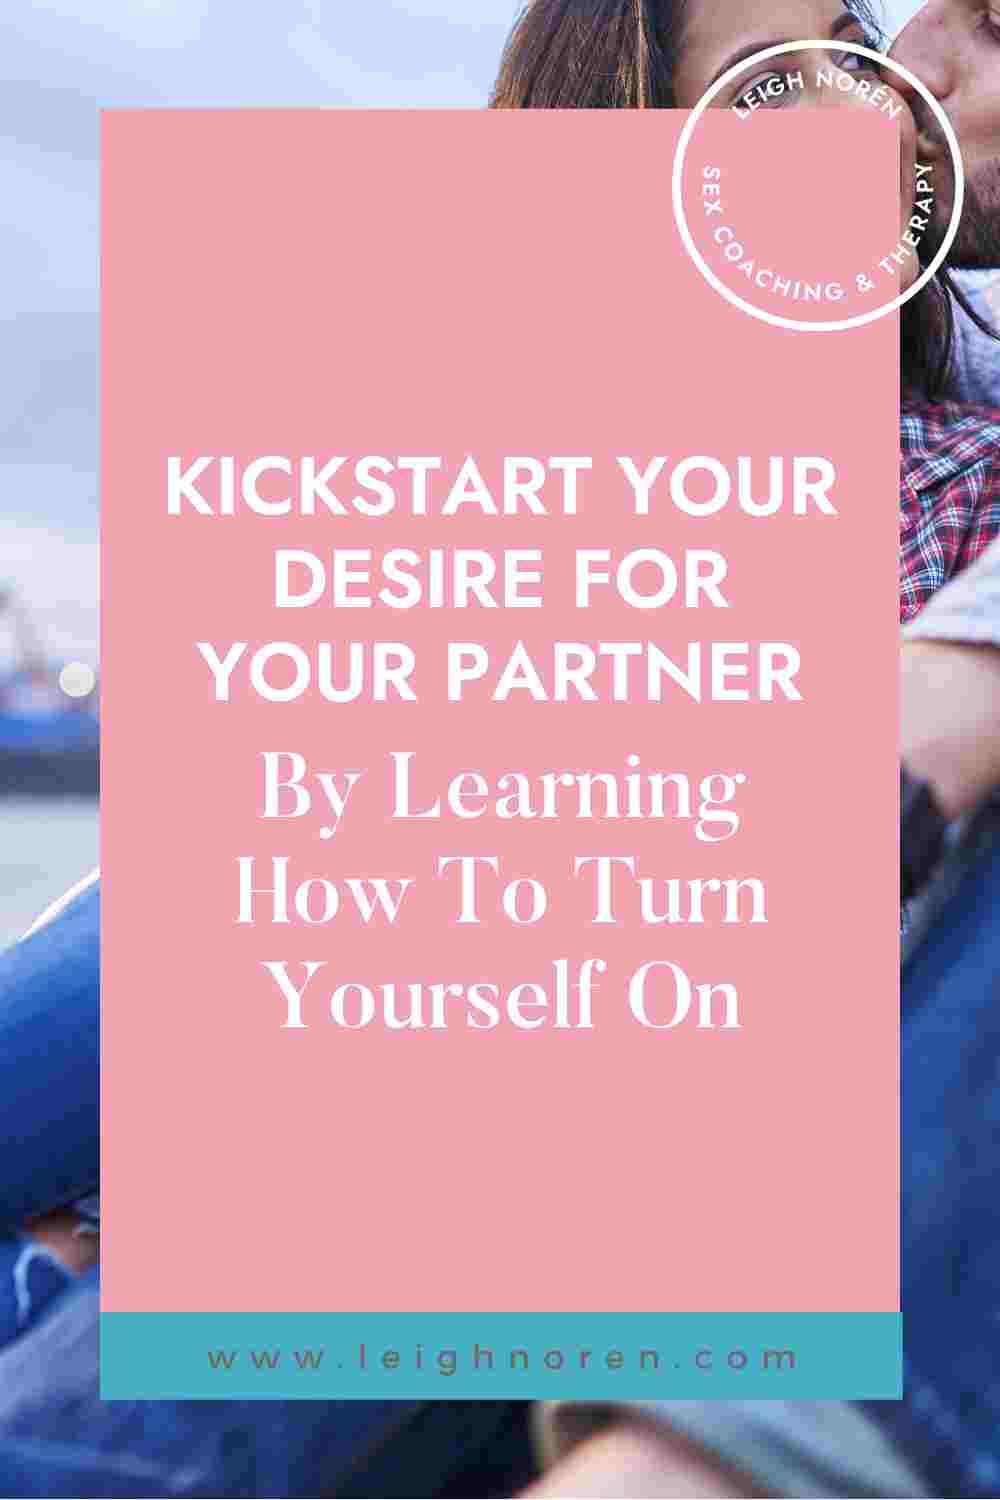 Kickstart your desire for your partner by learning how to turn yourself on